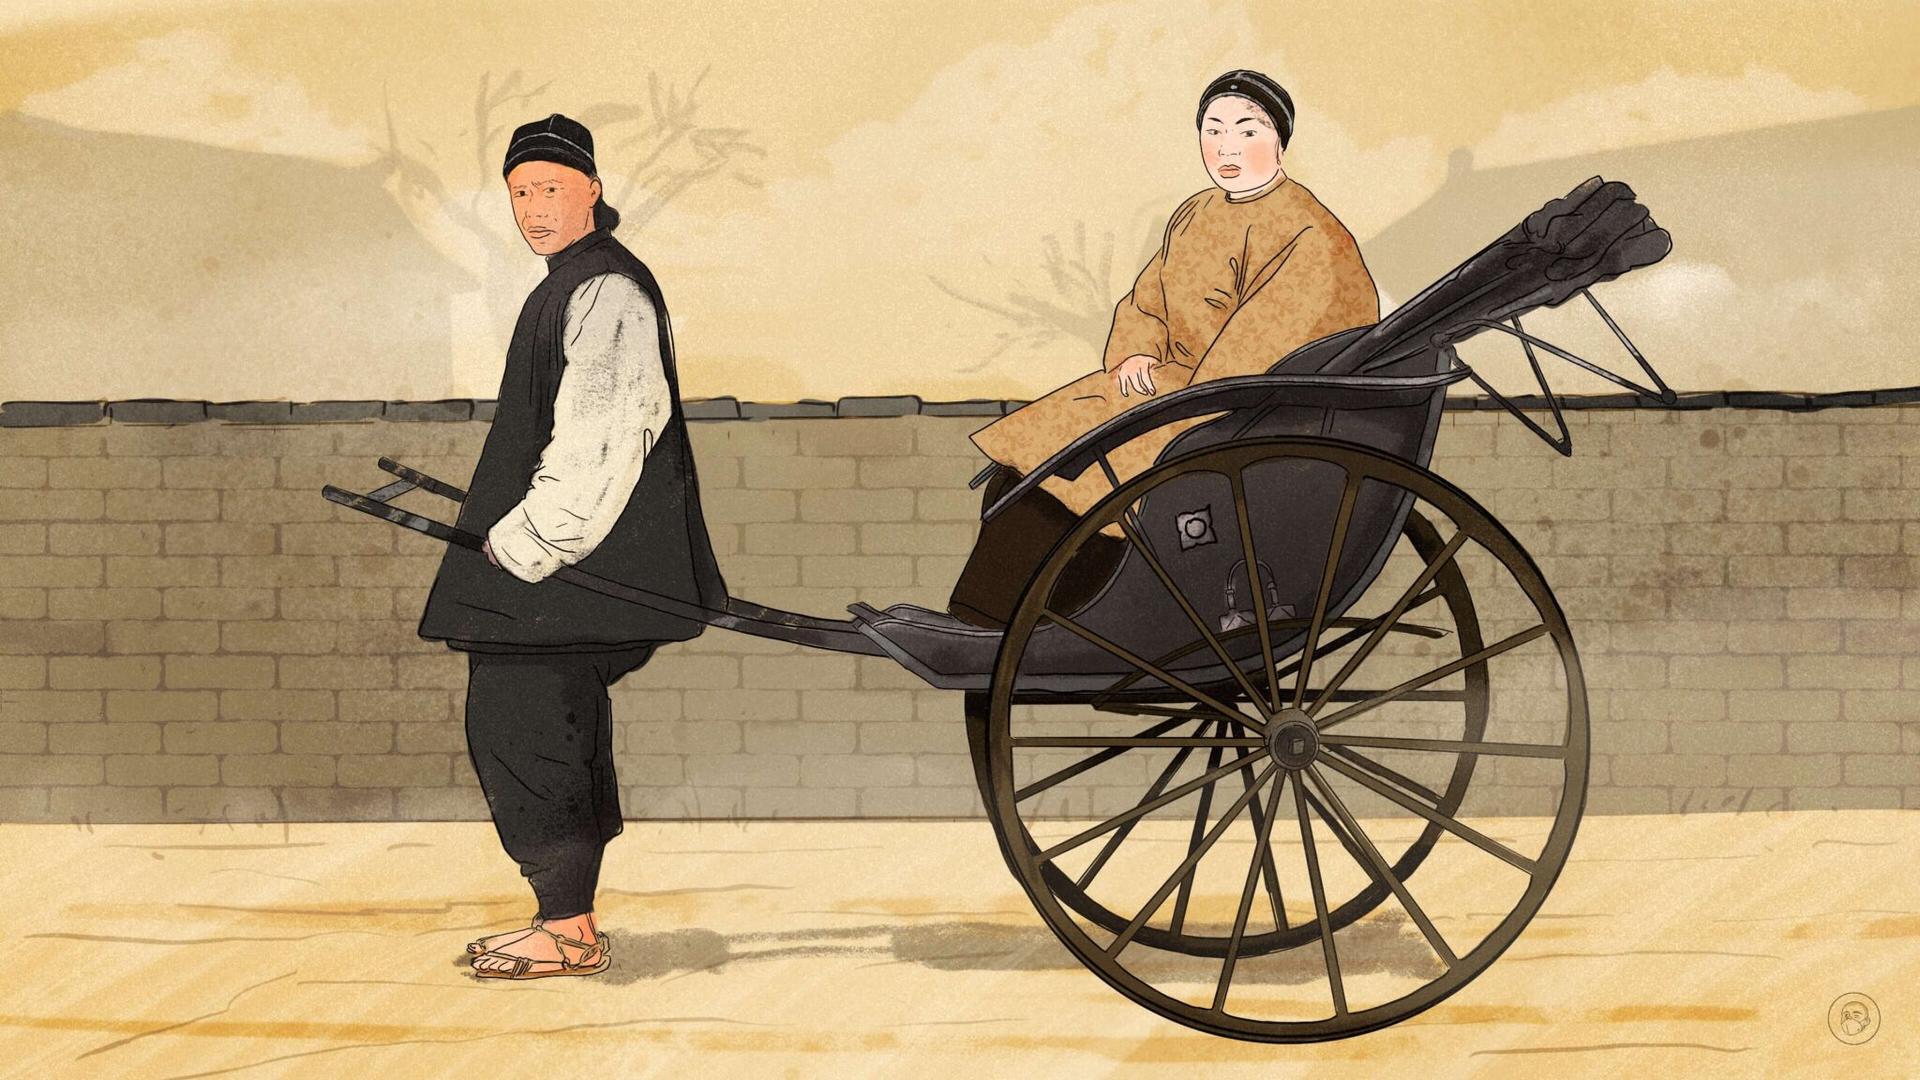 An illustration by Alex Santafe depicting a the story by Lao She Rickshaw Boy in ancient Beijing